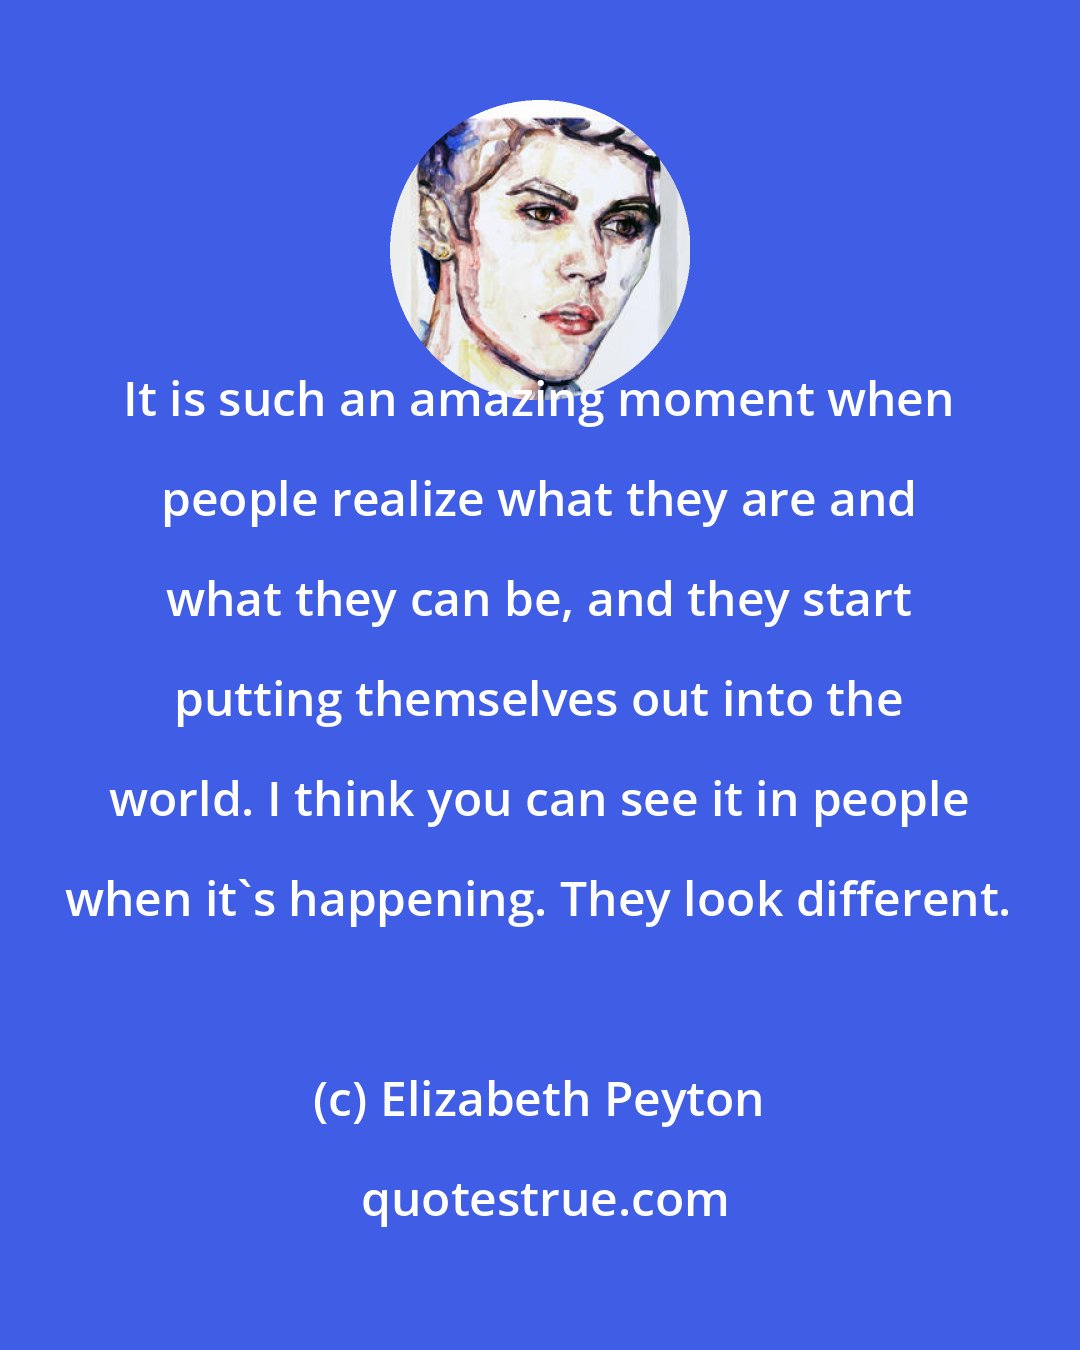 Elizabeth Peyton: It is such an amazing moment when people realize what they are and what they can be, and they start putting themselves out into the world. I think you can see it in people when it's happening. They look different.